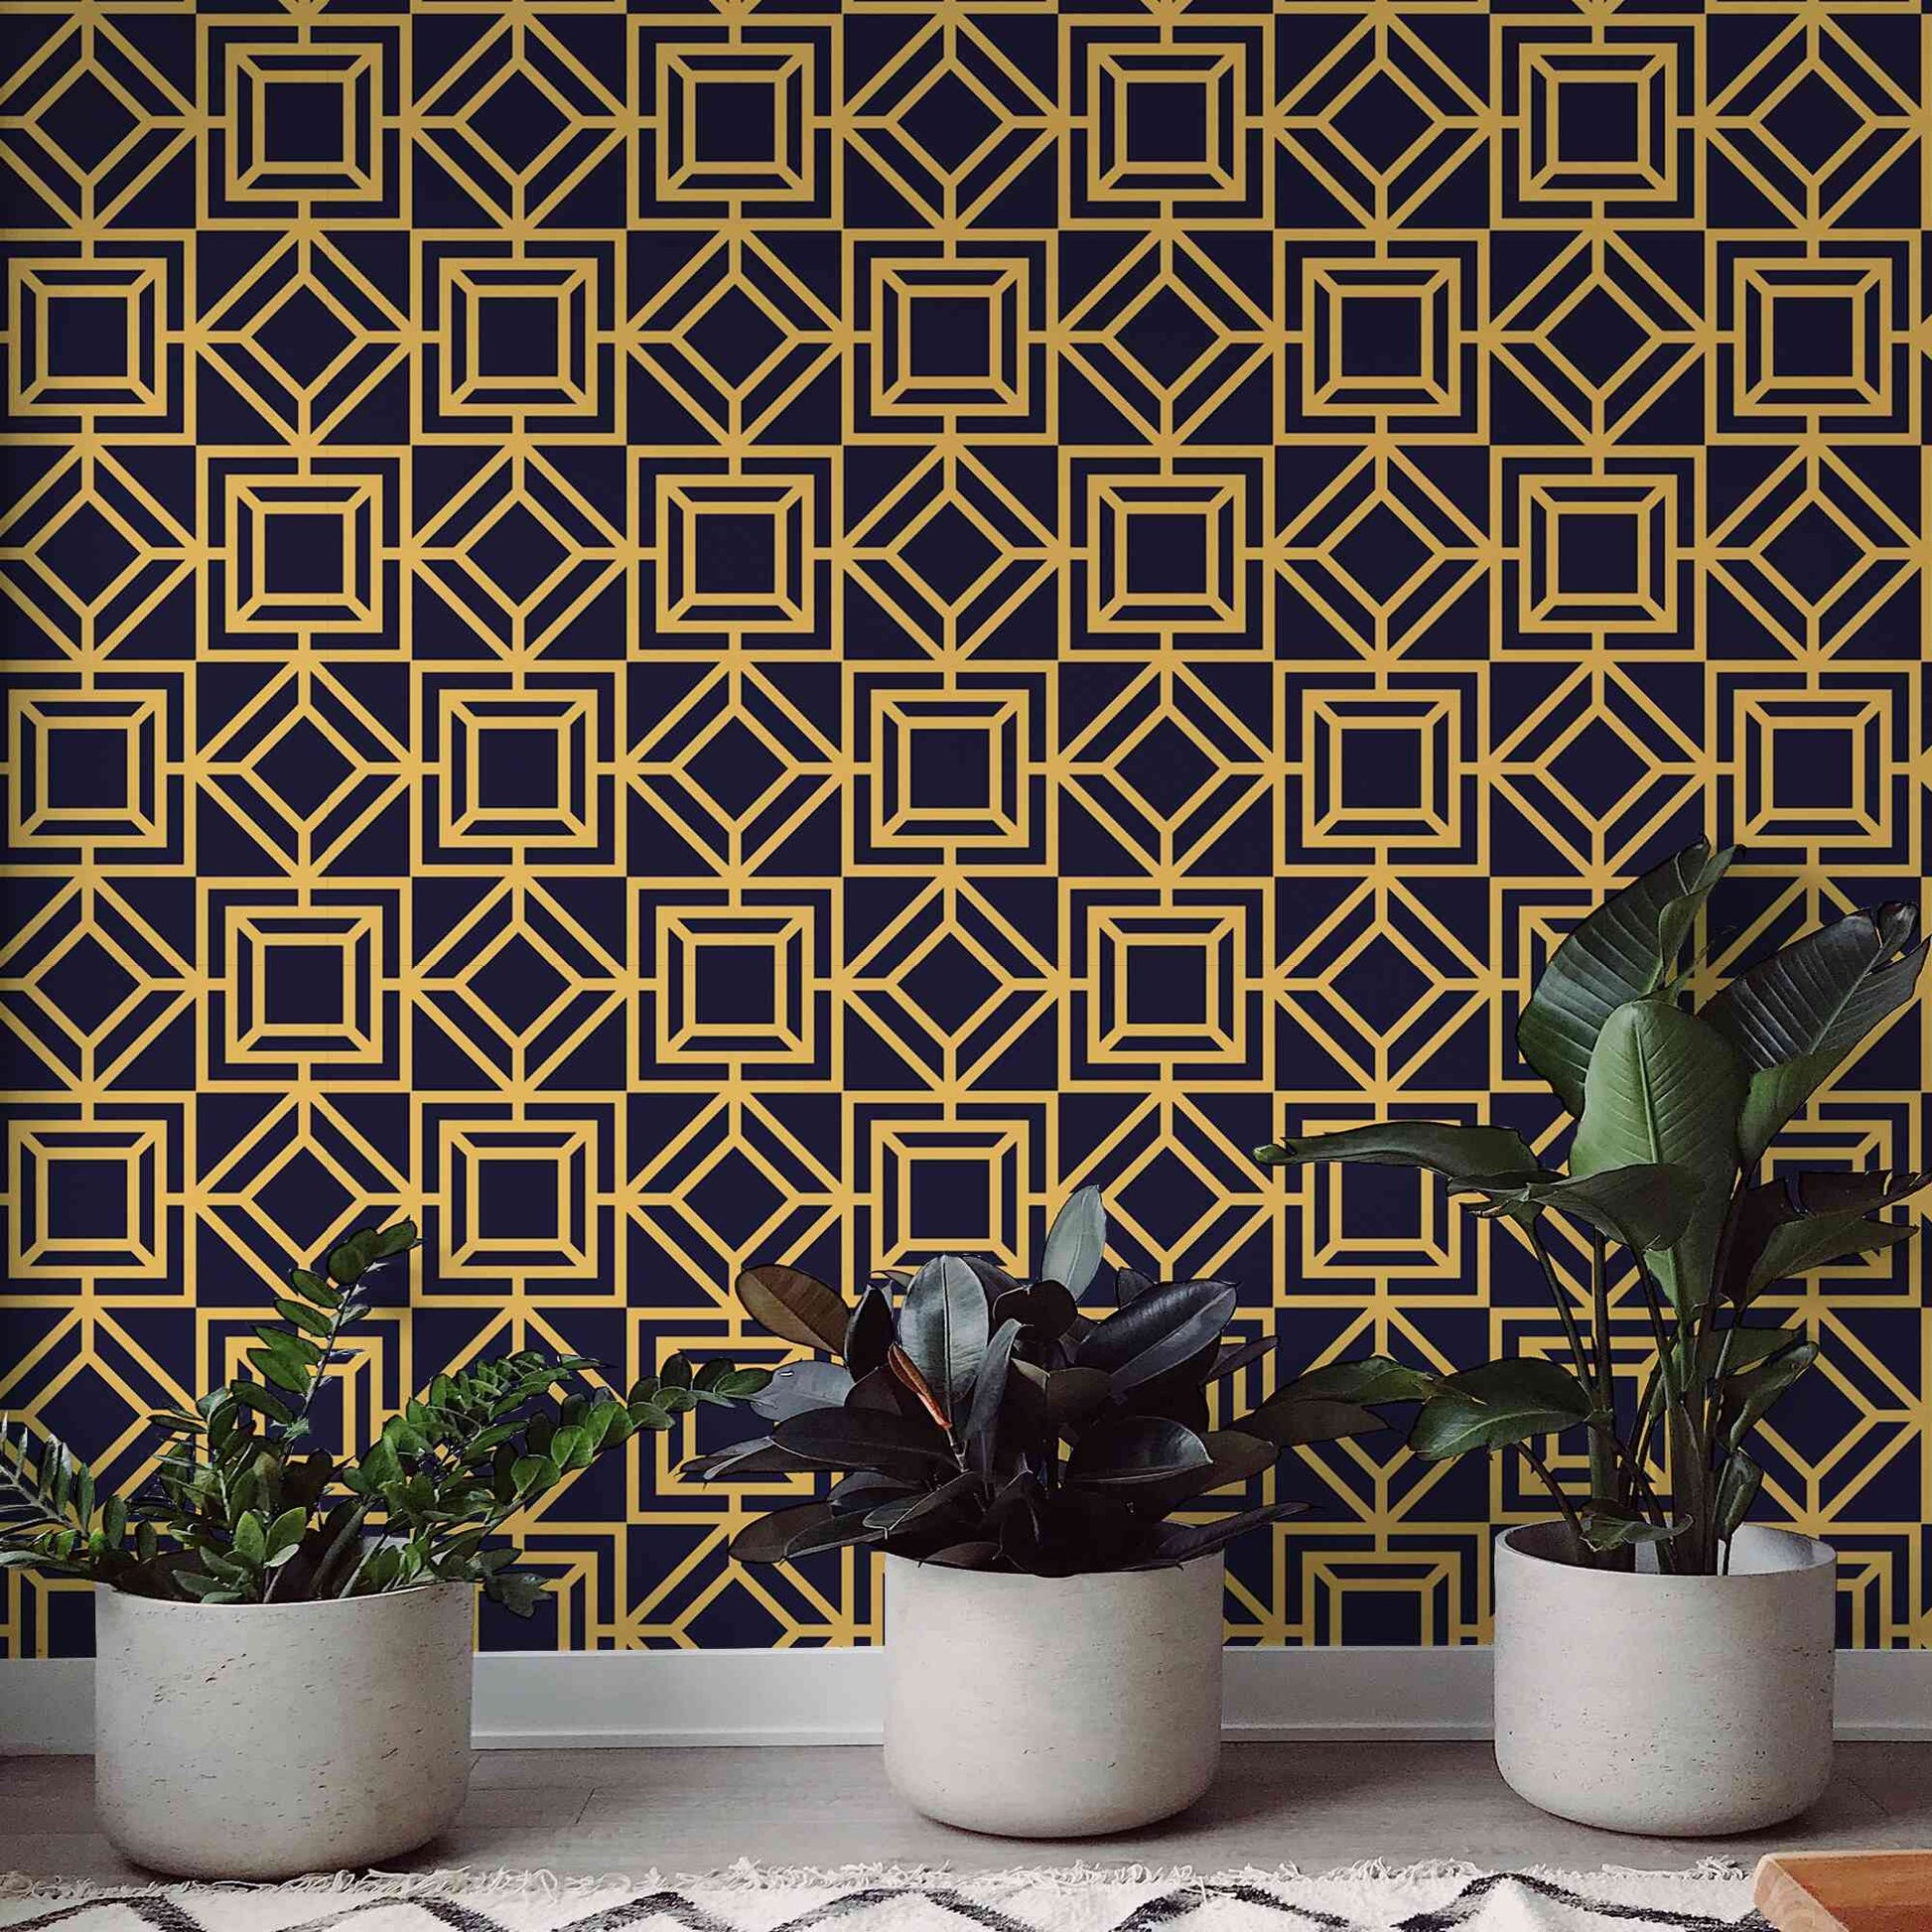 Self-adhesive luxury wallpaper for an easy and stylish home decor upgrade.